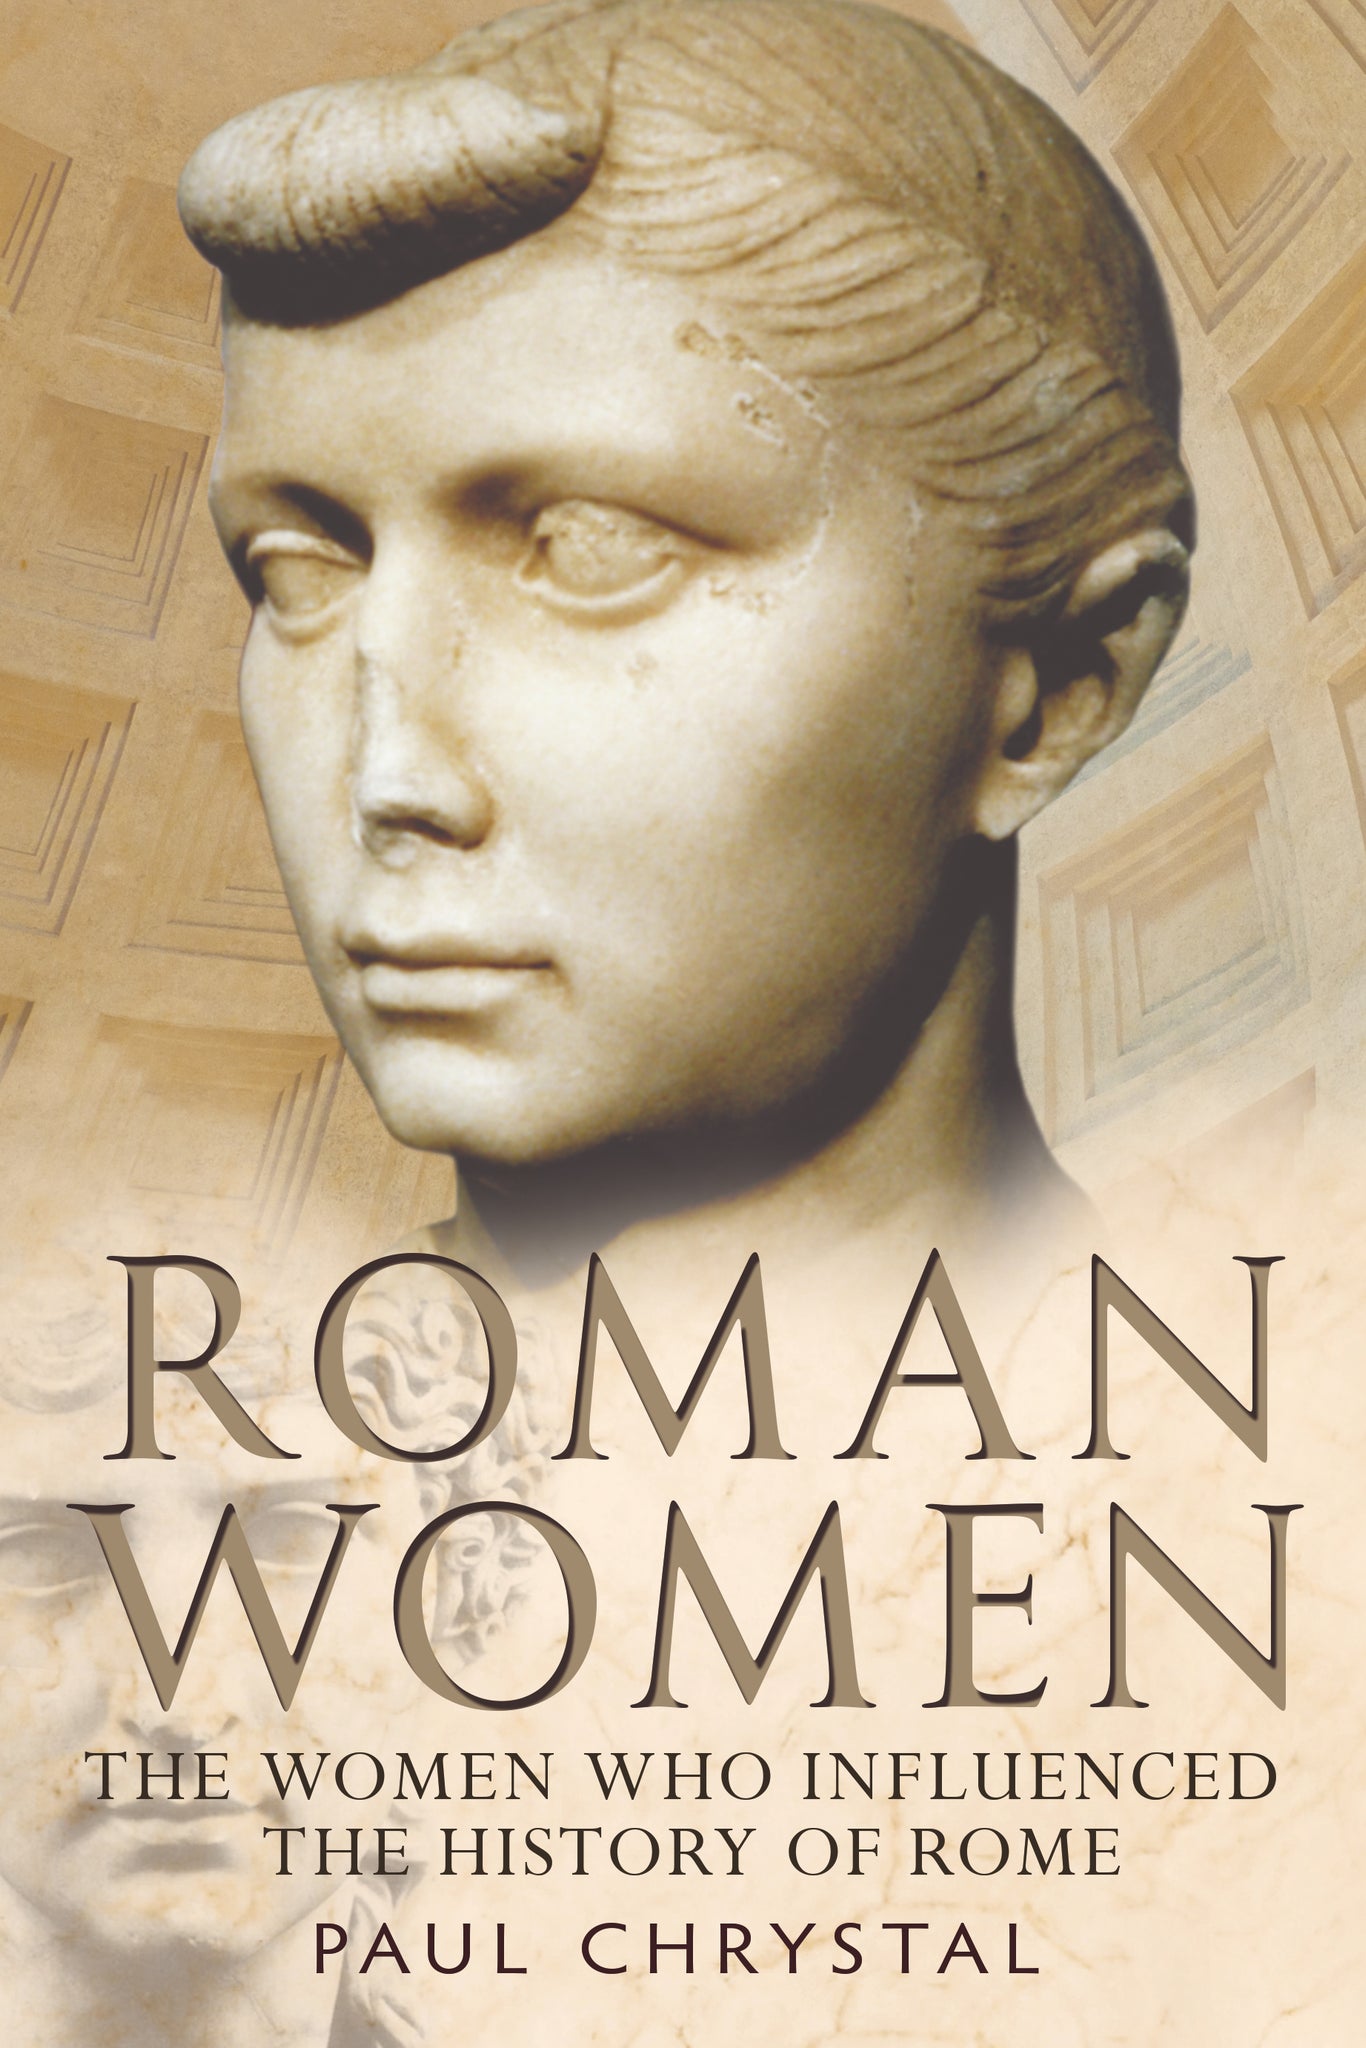 Roman Women: The Women who influenced the History of Rome